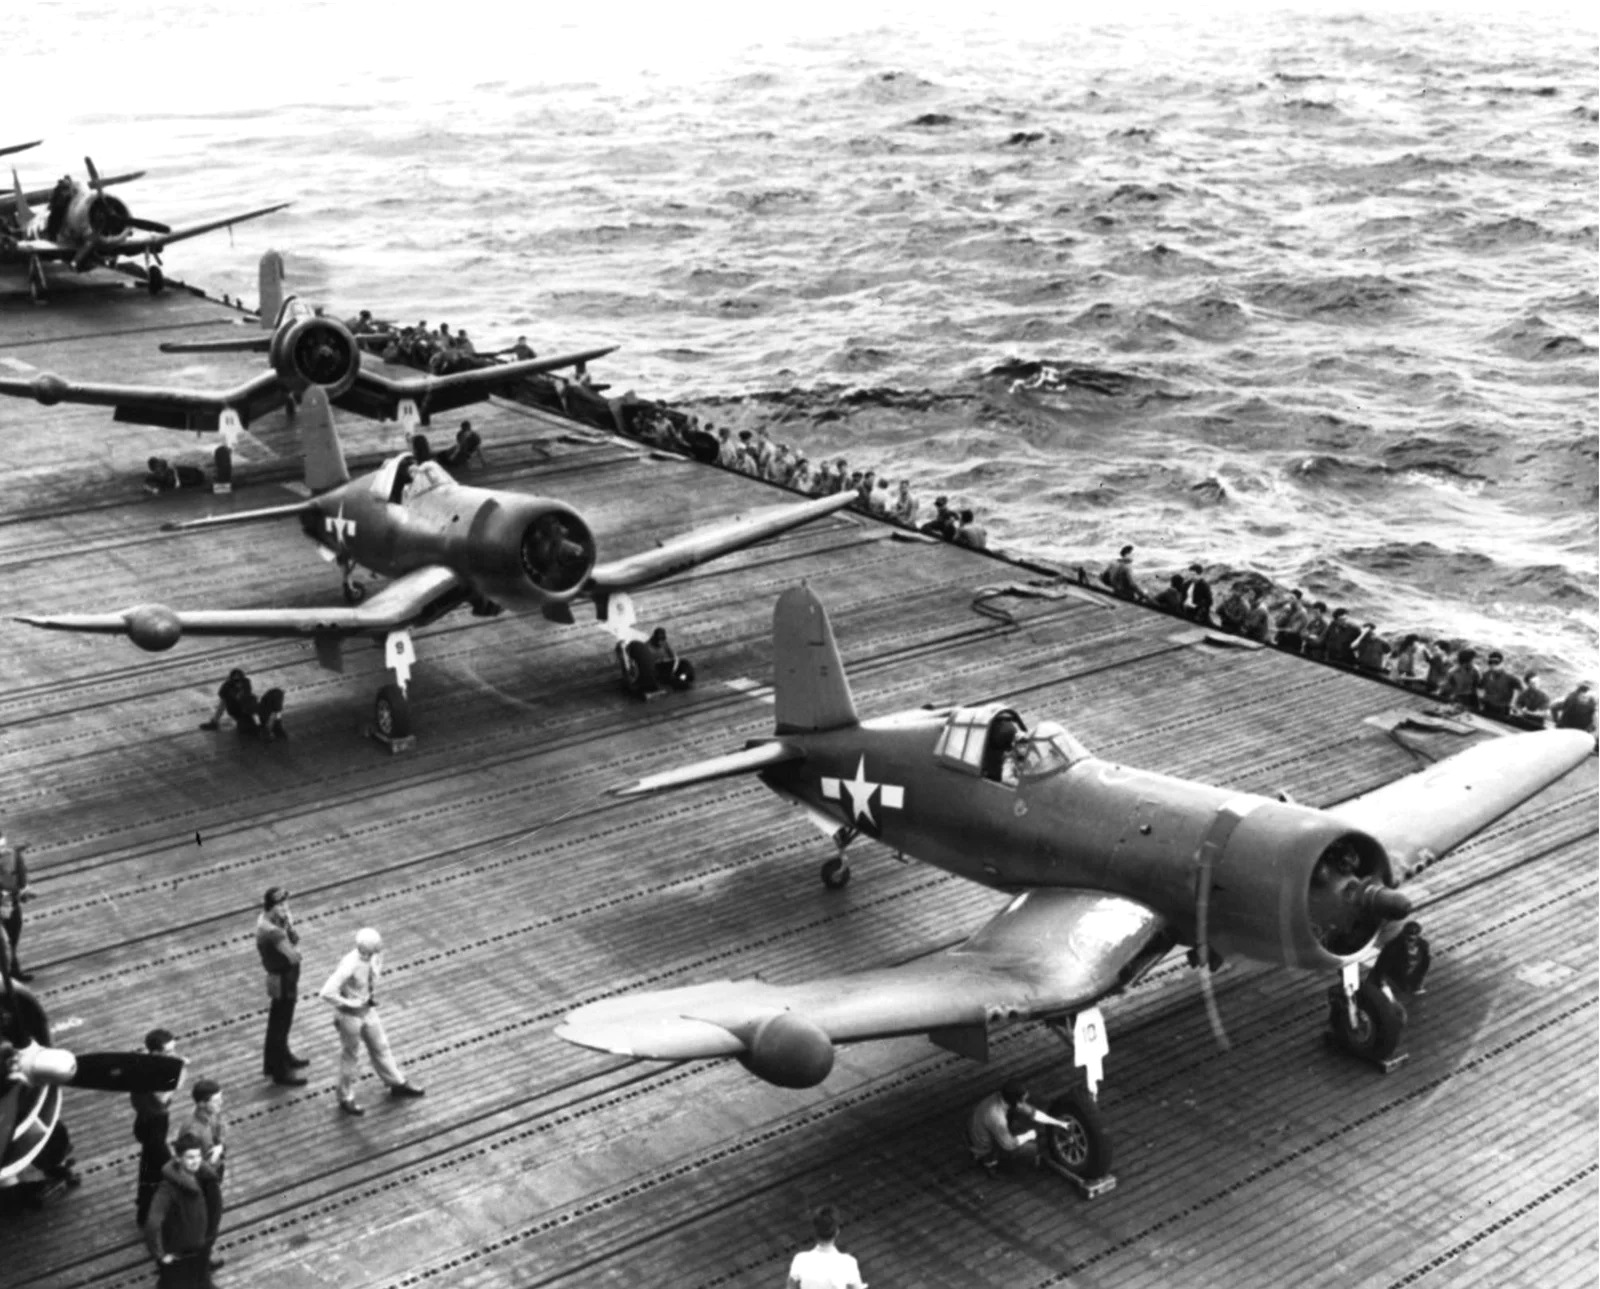 F4U-2 Corsair fighters of US Navy squadron VF(N)-101 aboard USS Intrepid, Central Pacific, early 1944